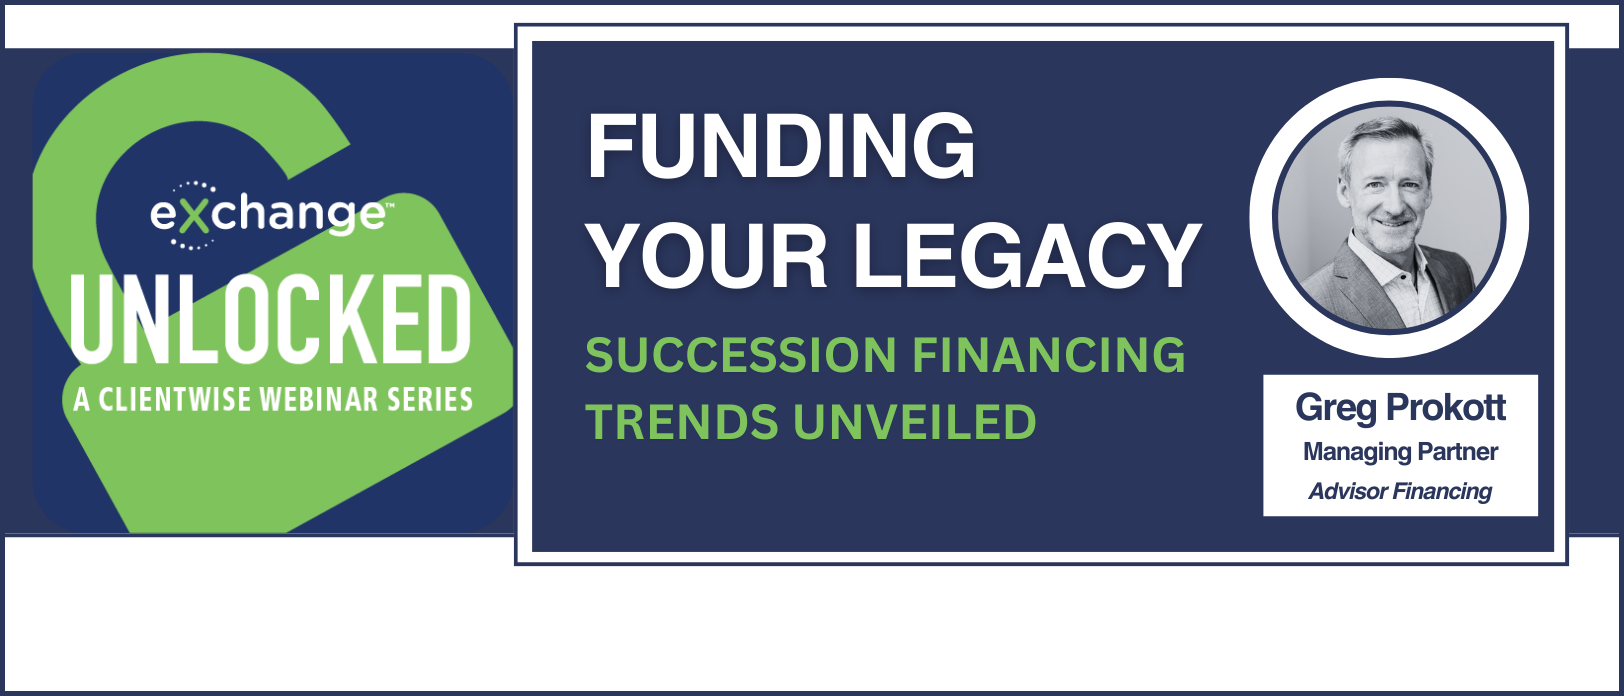 ClientWise eXchange™ Unlocked-Funding Your Legacy: Succession Financing Trends Unveiled